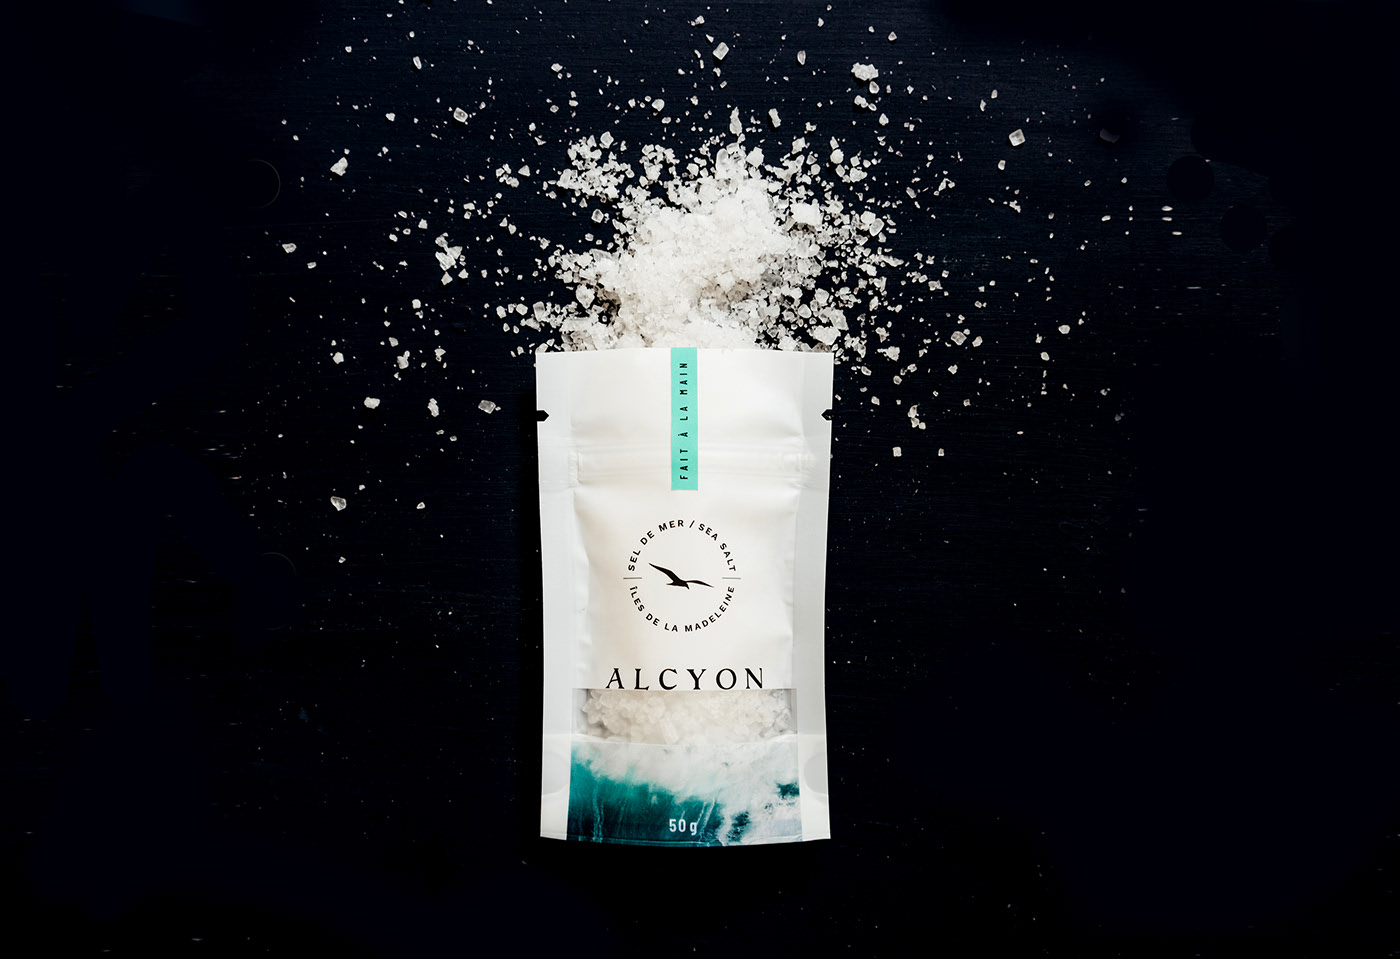 Alcyon Sea Salt Brand Identity and Packaging